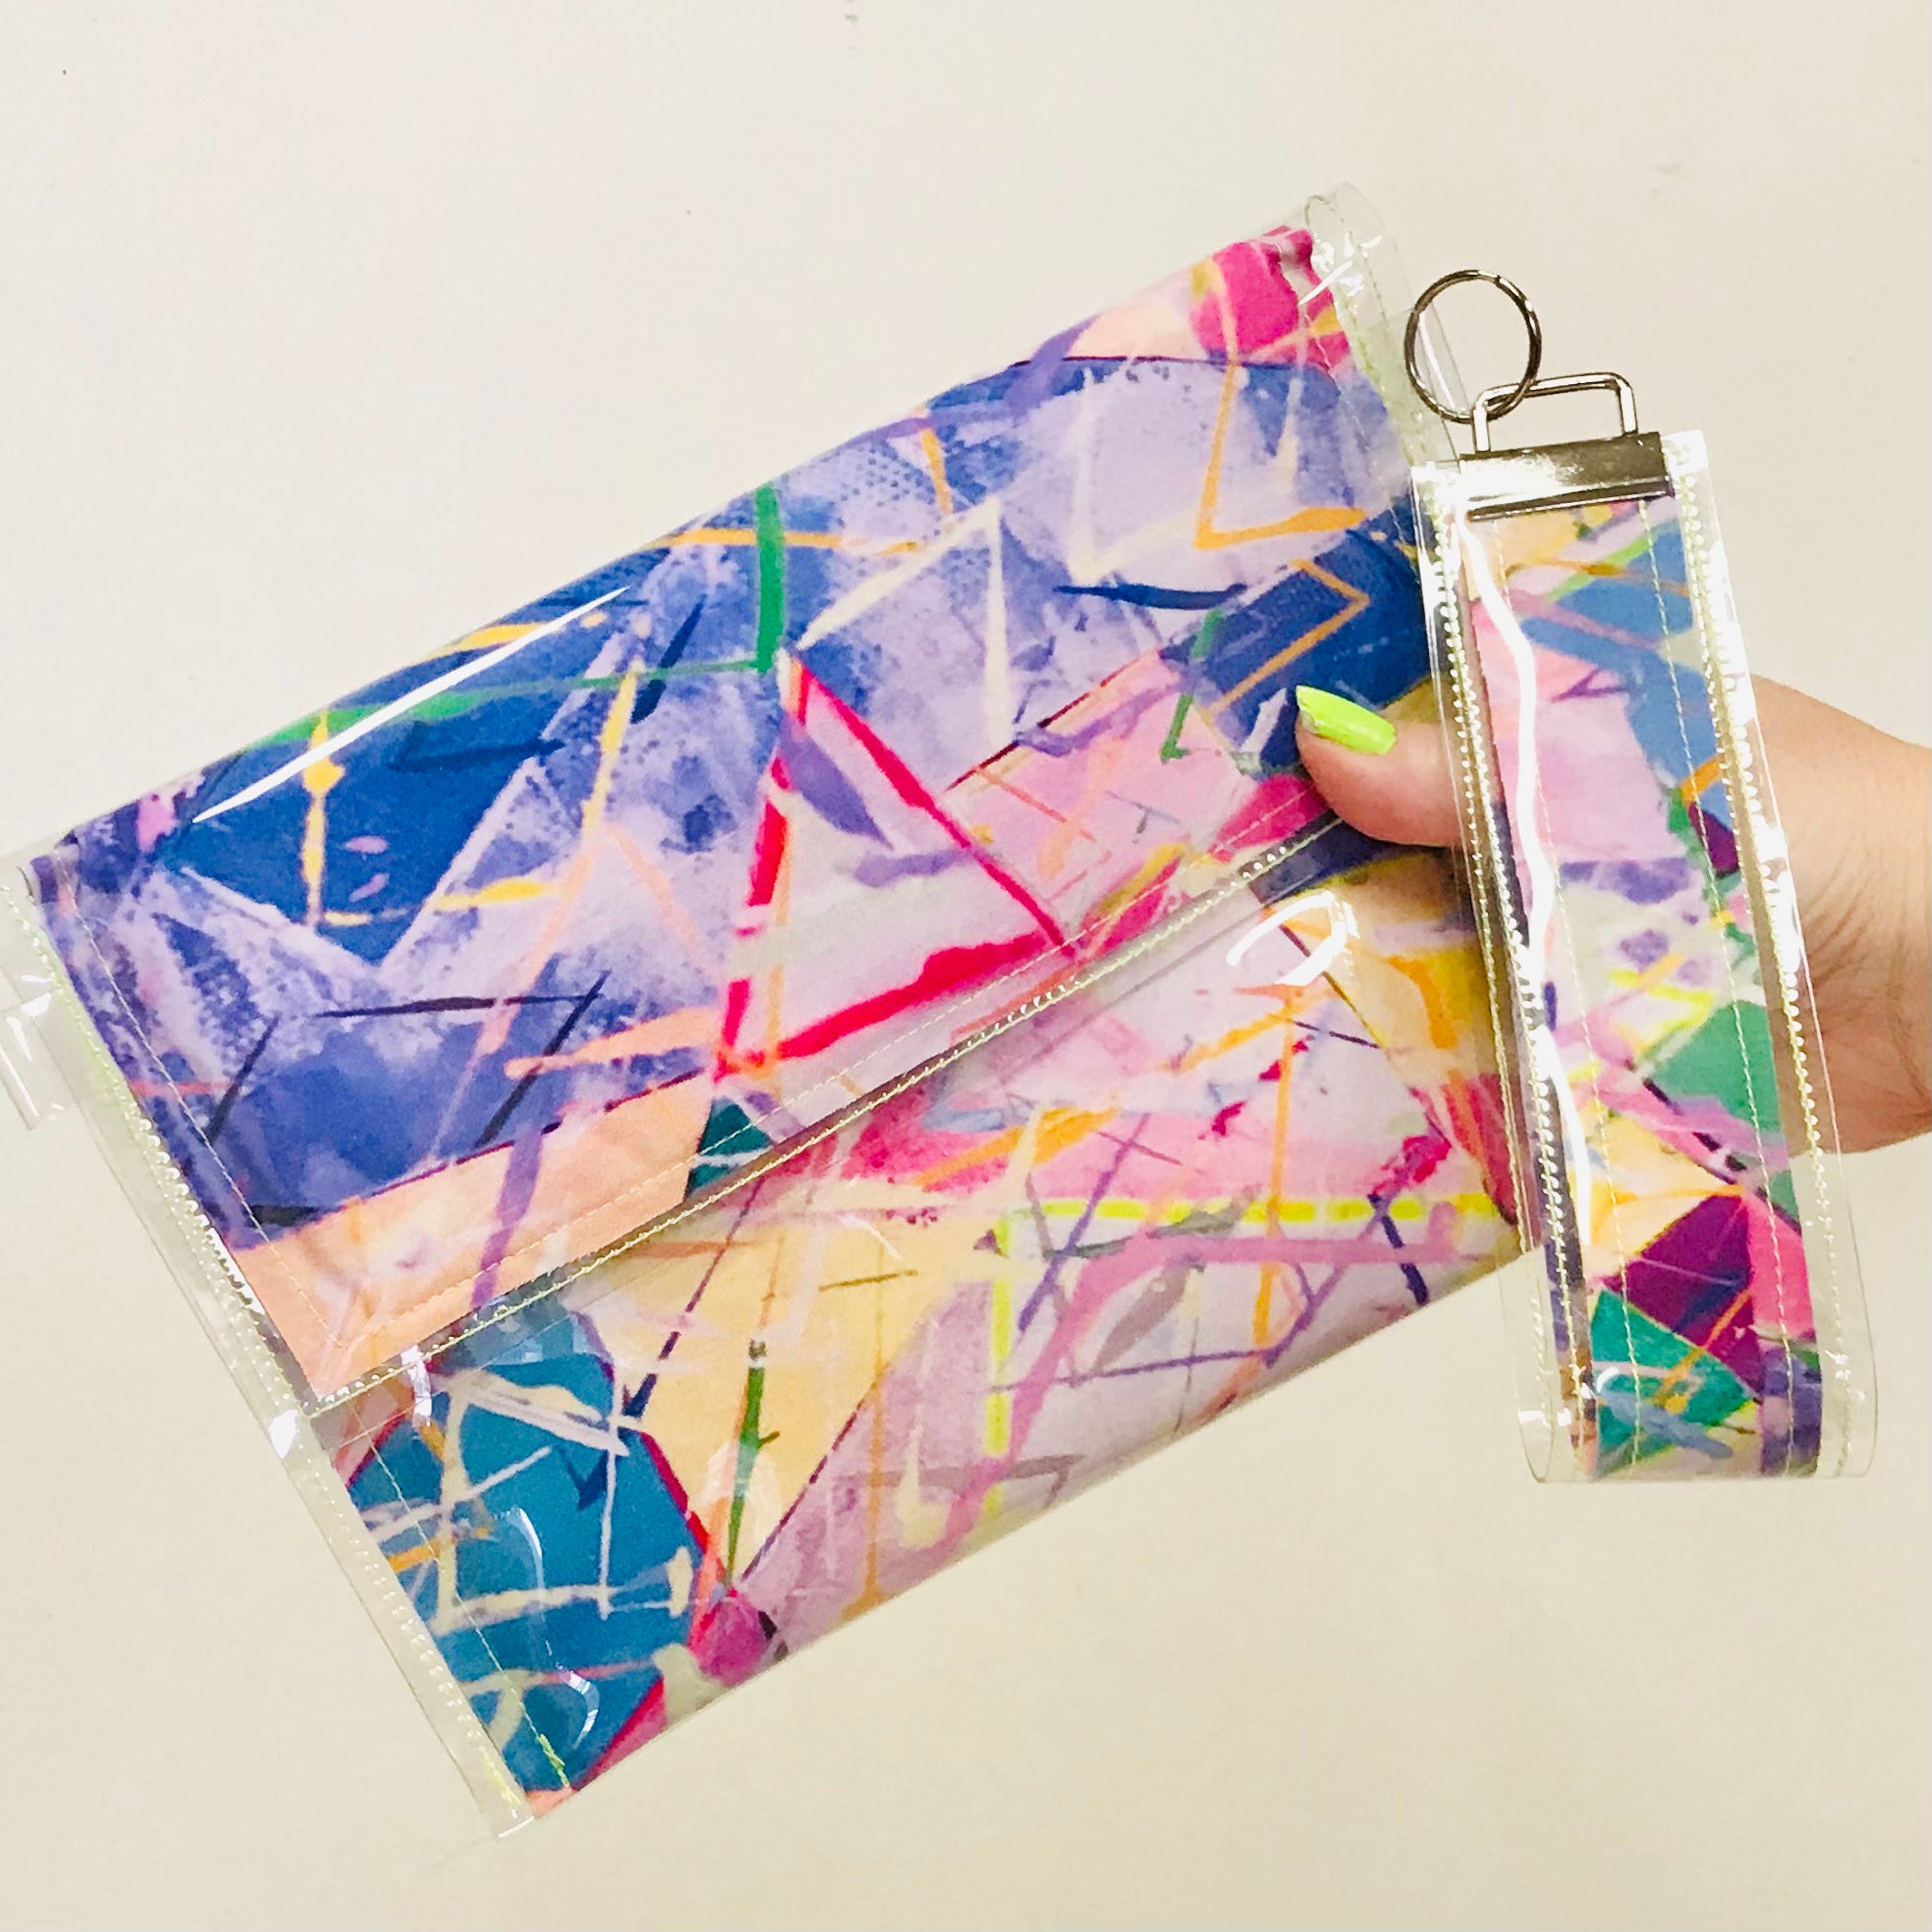 Handcrafted PVC Clutch Bag